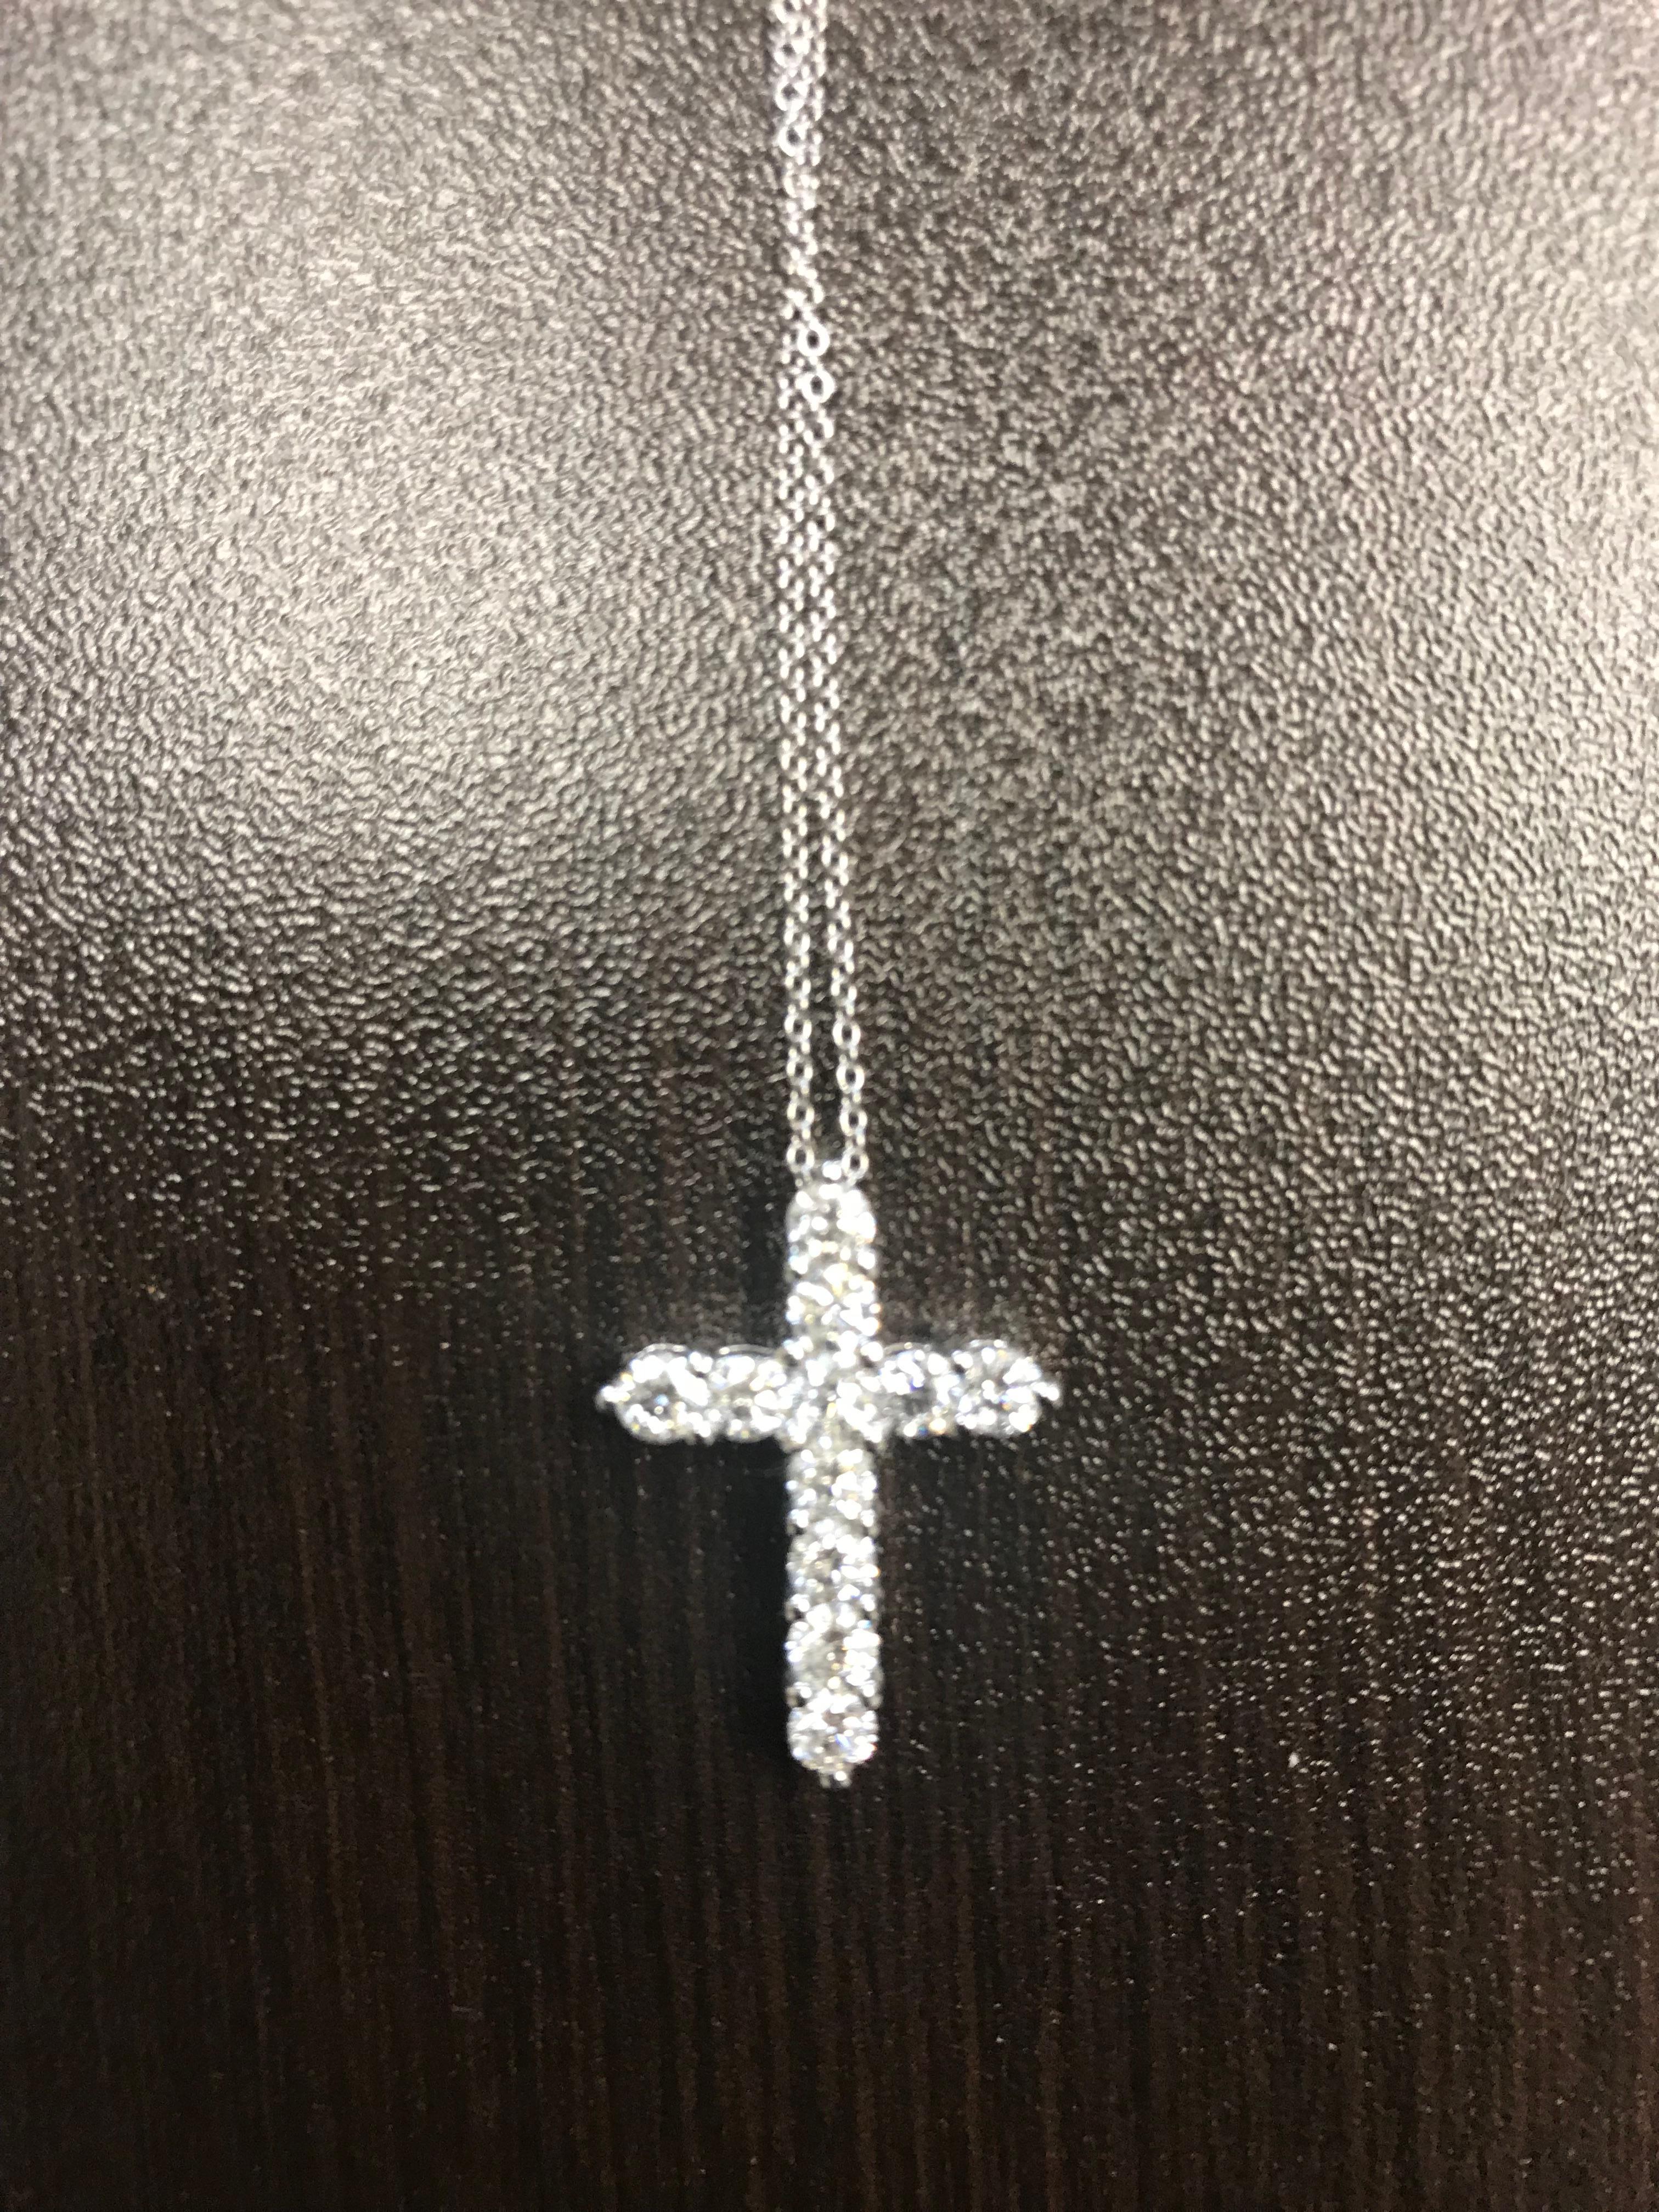 Diamond Cross White Gold Pendant Necklace In Excellent Condition For Sale In Great Neck, NY